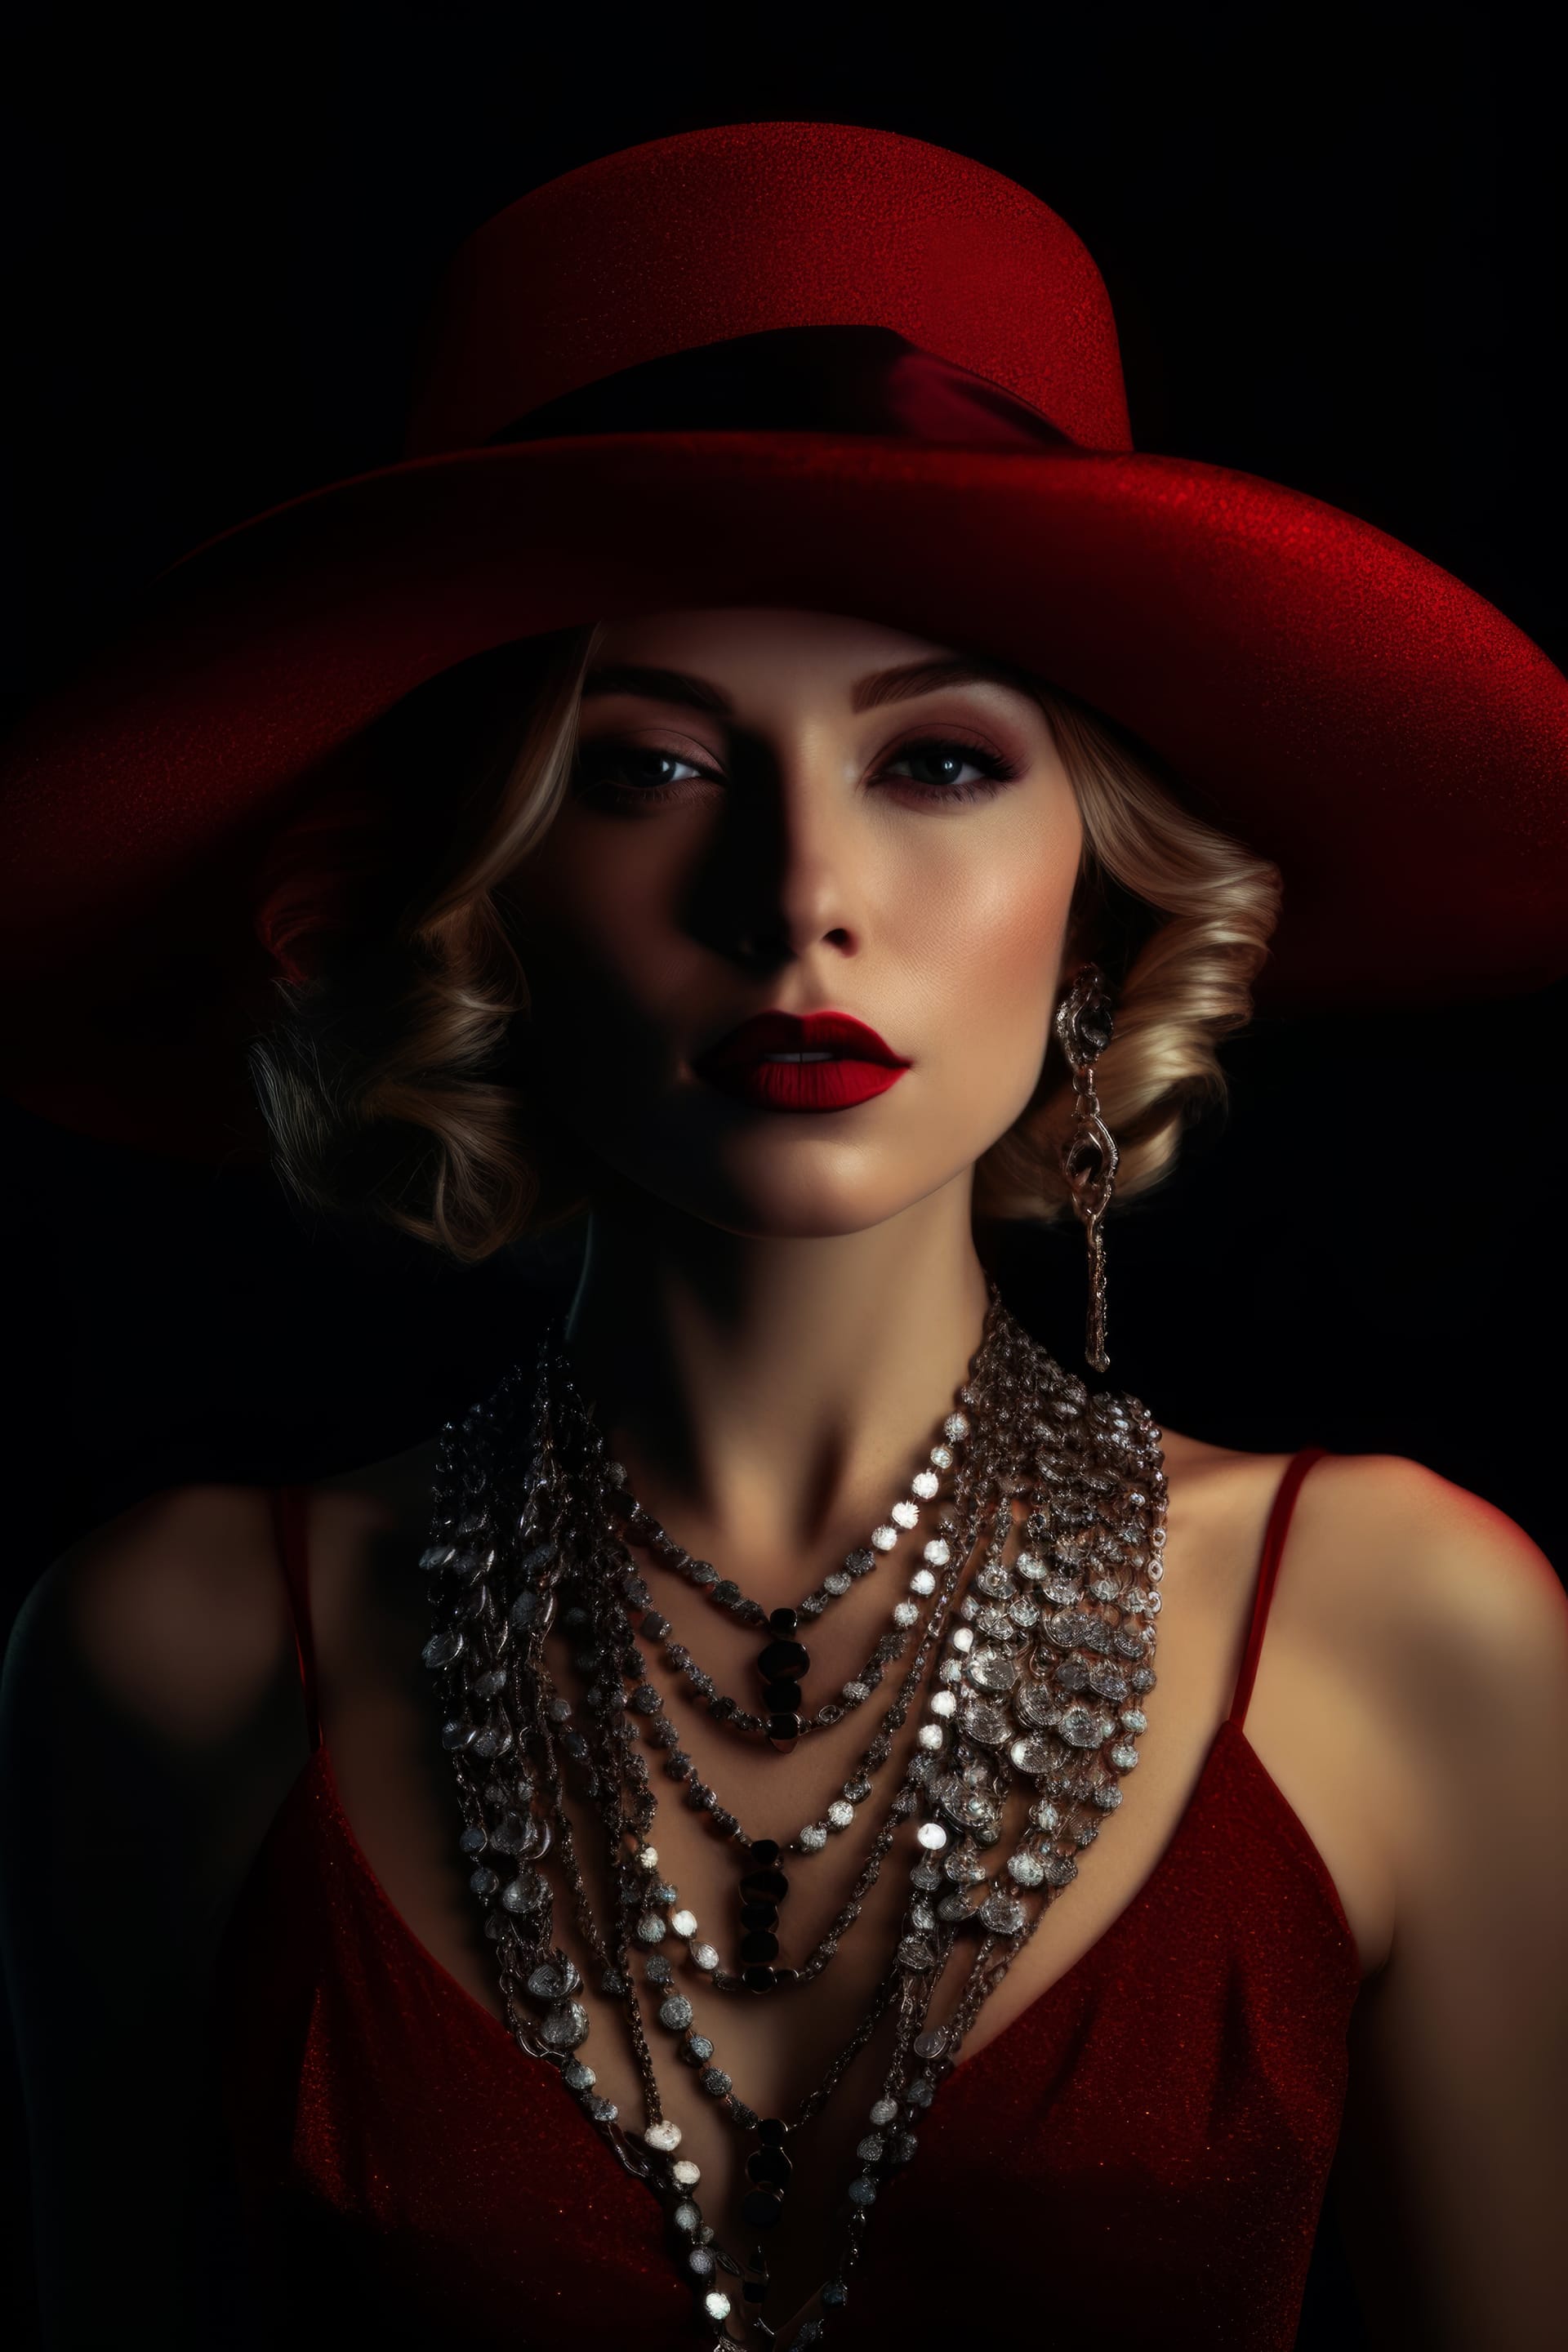 Woman red hat red dress stands front black background